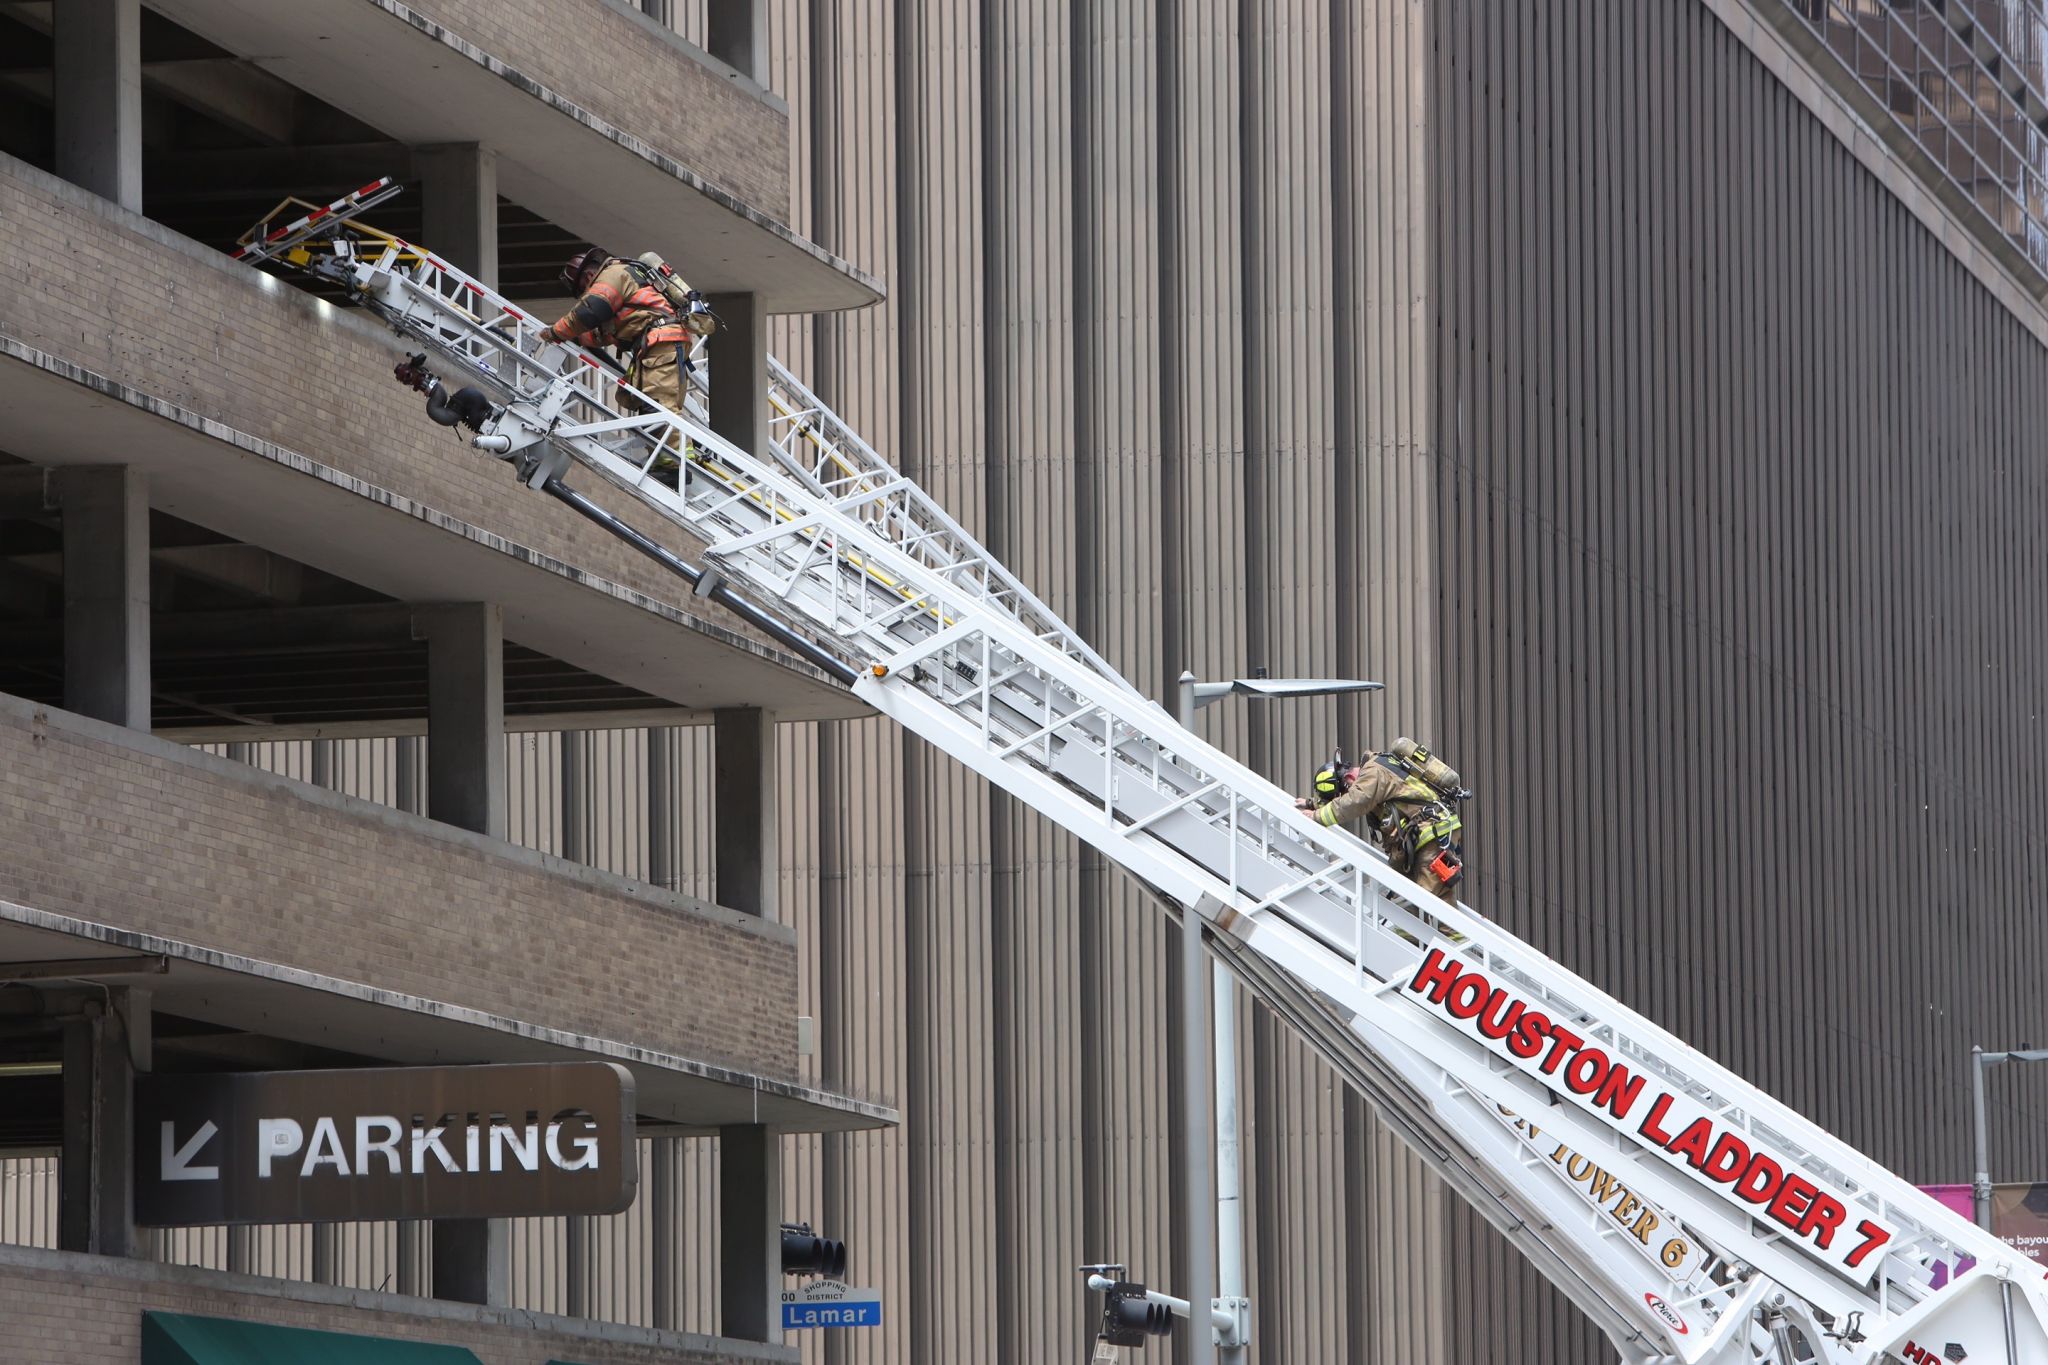 Fire erupts in downtown Houston parking garage - Houston Chronicle2048 x 1365